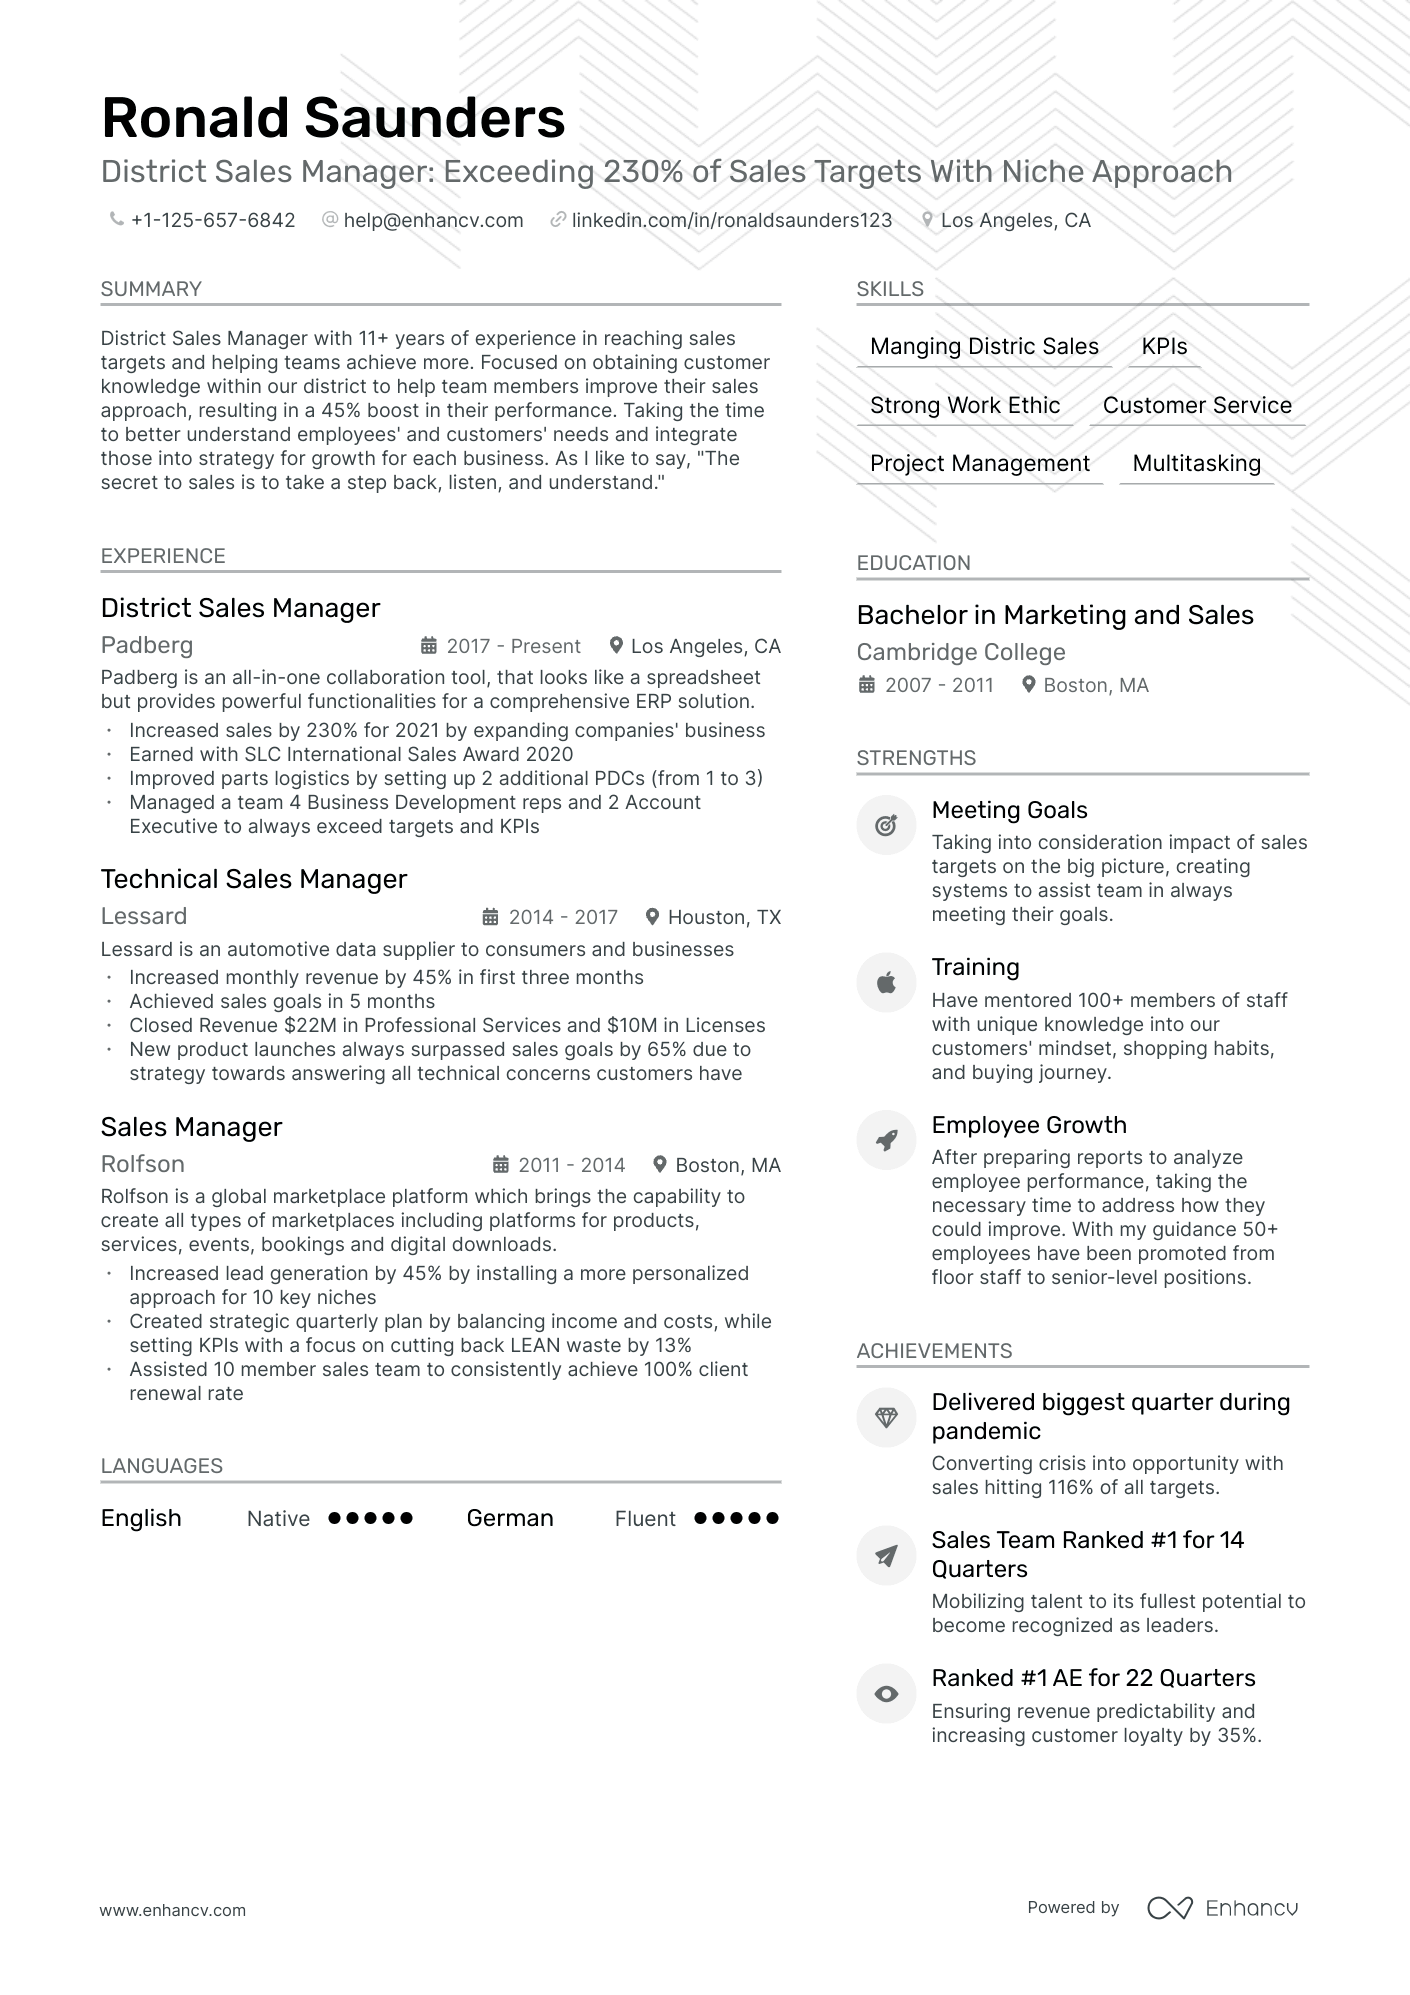 District Sales Manager resume example